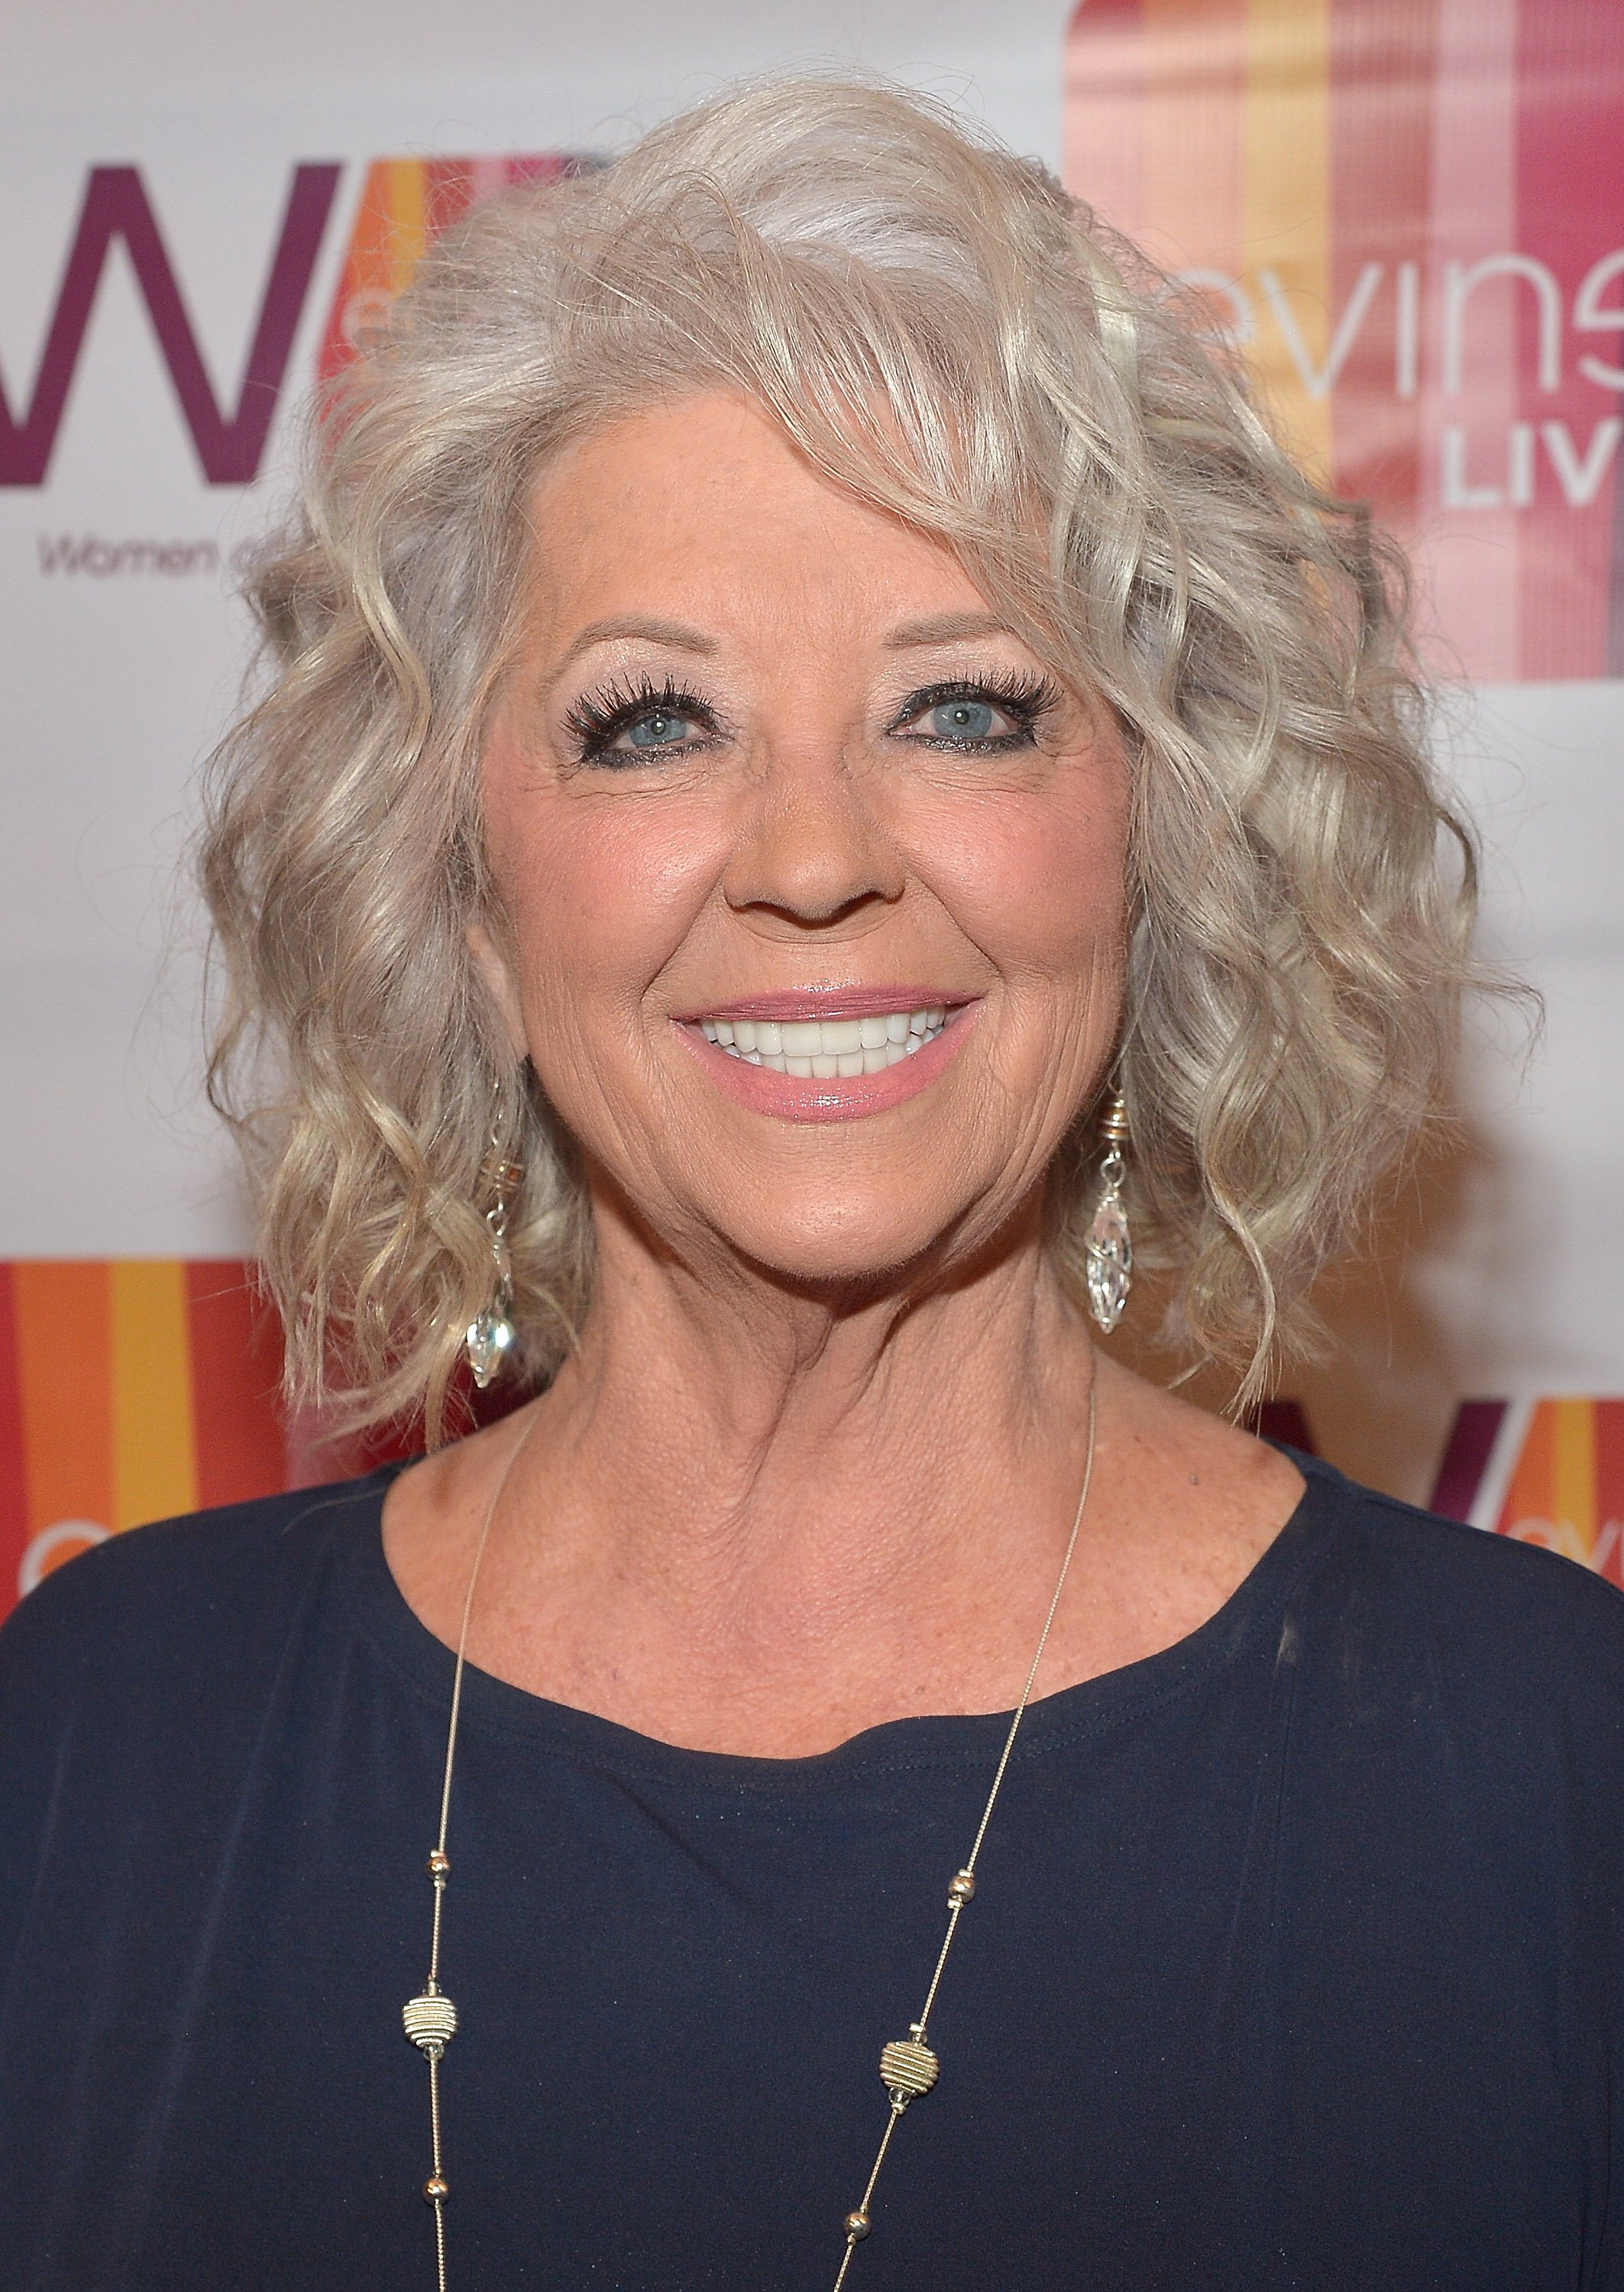 Paula Deen at the Celebrating The Women Of EVINE Live at Villa Blanca on September 29, 2015 in Beverly Hills, California | Photo: Getty Images